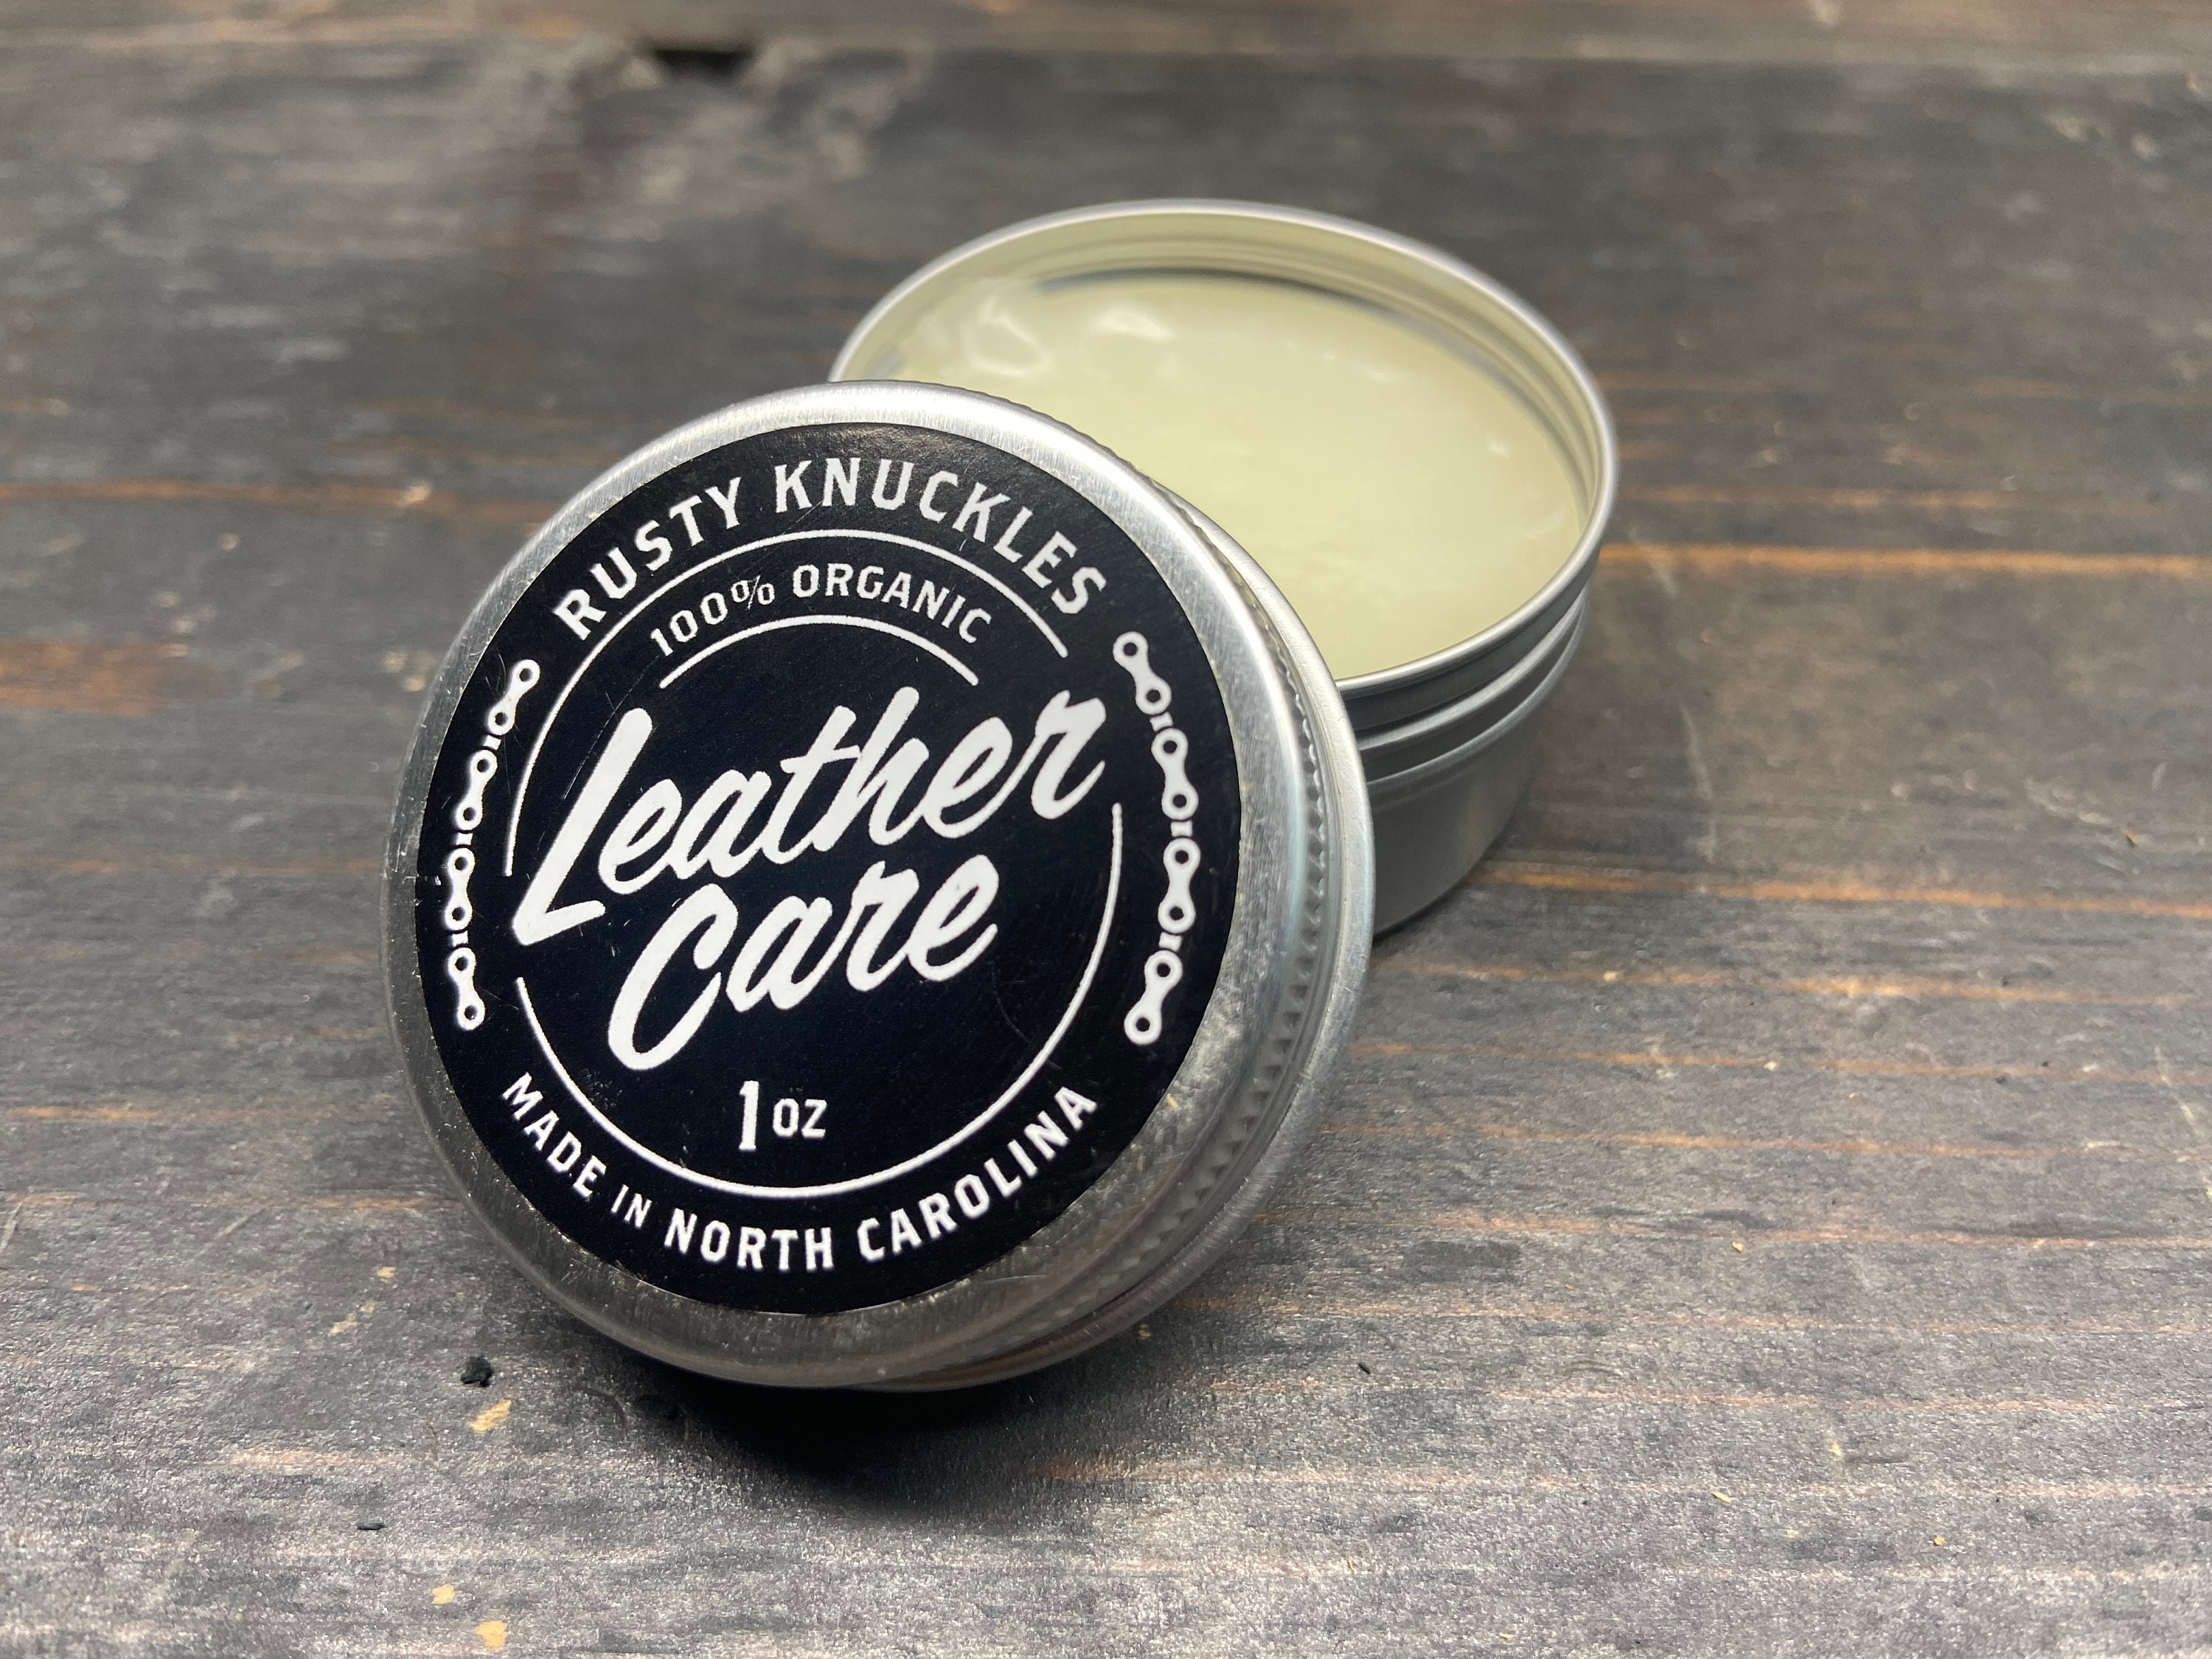 Black Leather Care, Natural Leather Conditioner, Black Leather